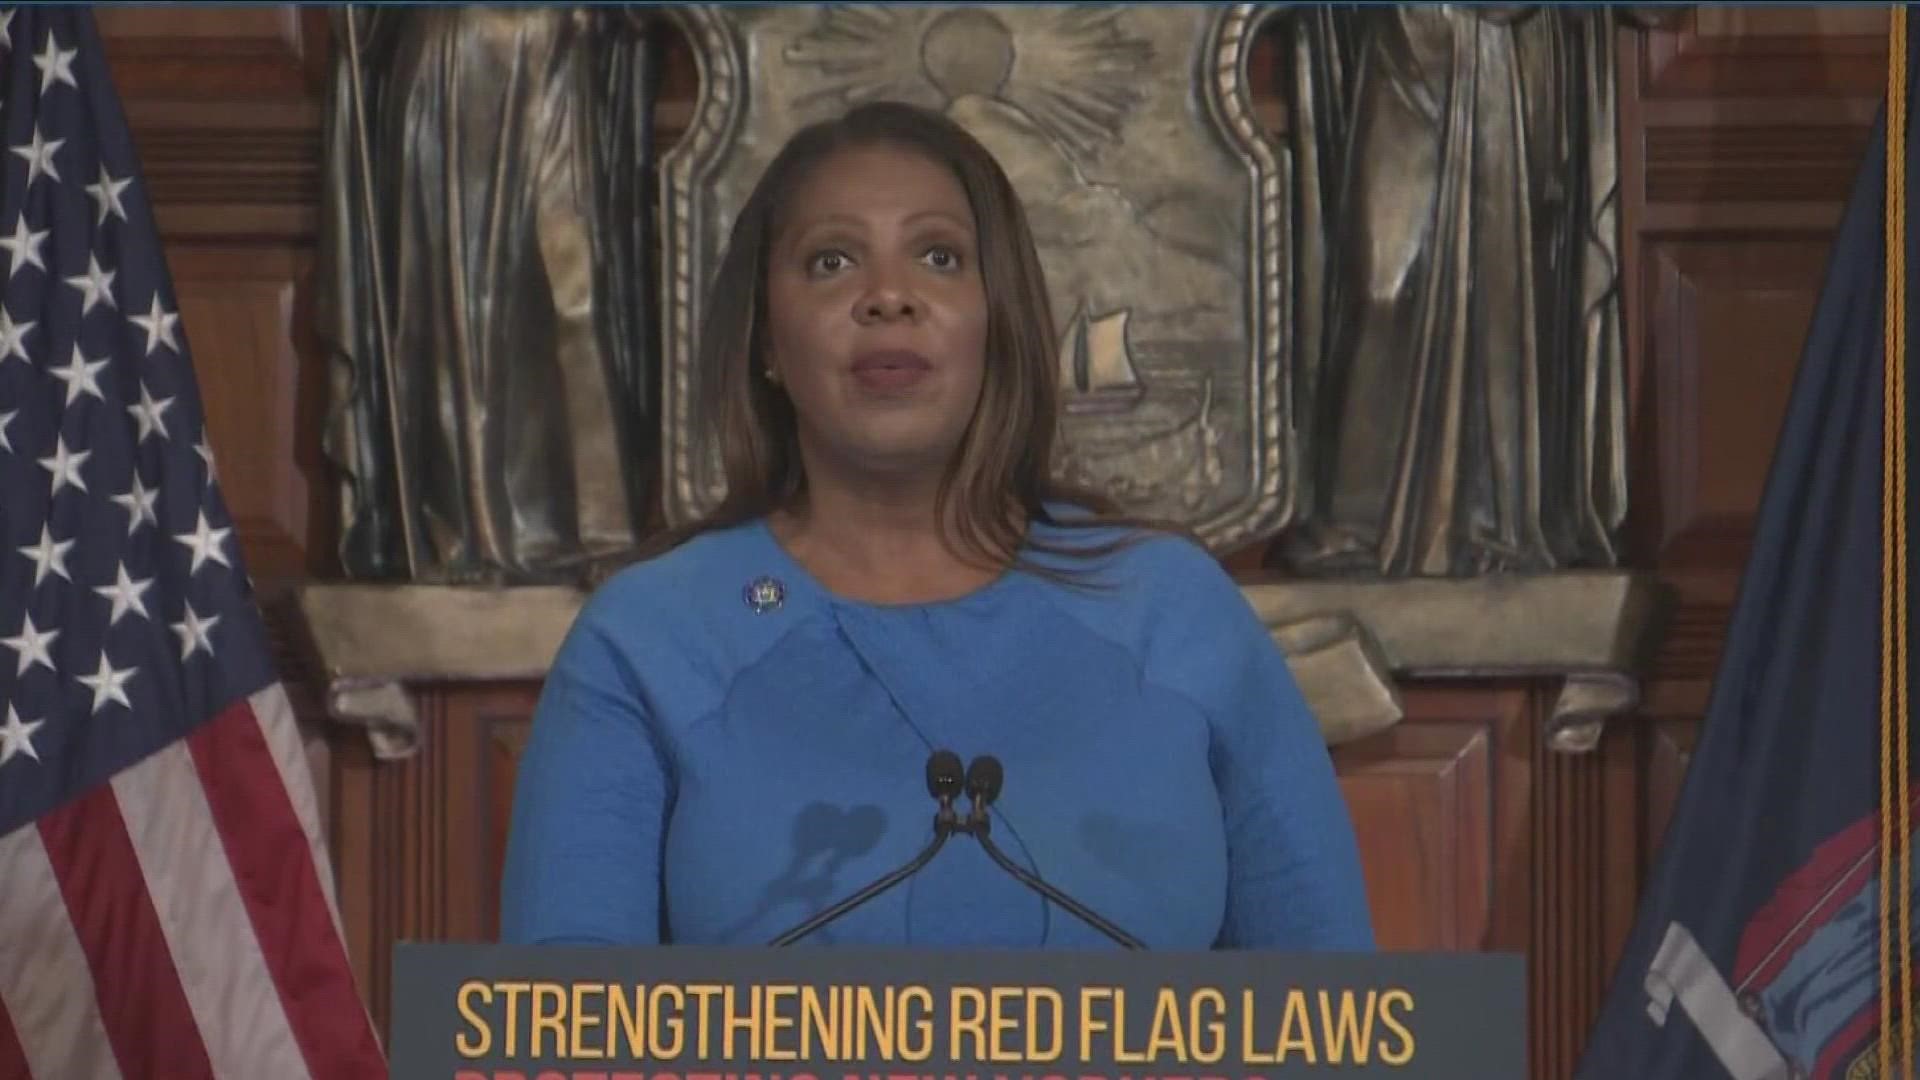 New York State Attorney General Letitia James made it very clear today at a press conference on red flag laws in Albany that she did not misspeak l